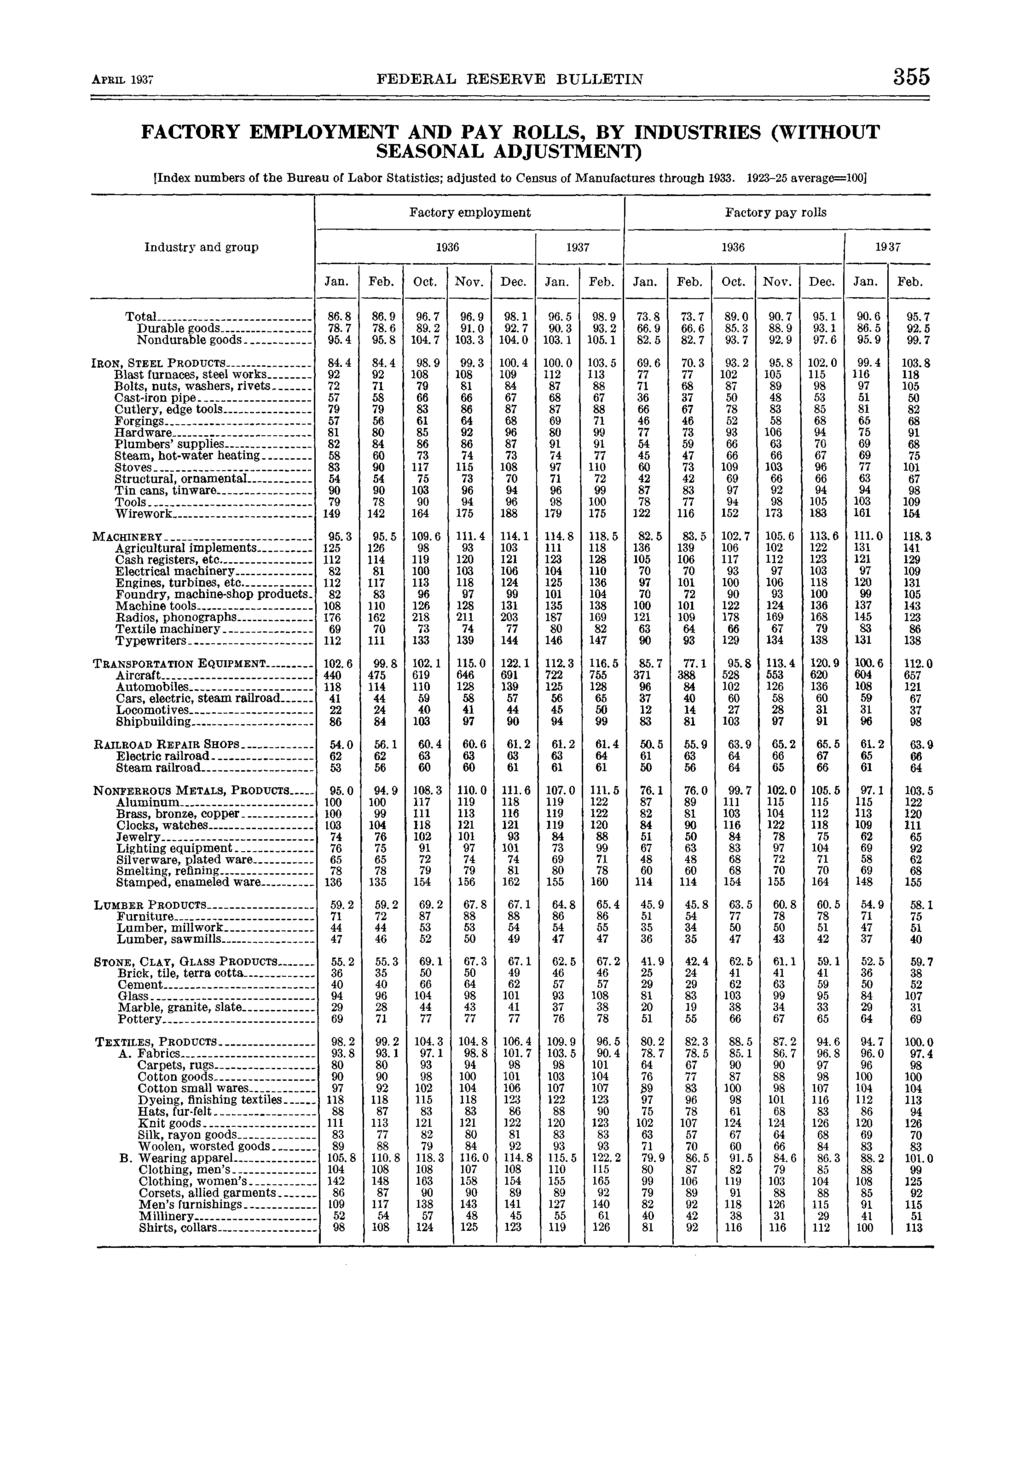 APRIL FEDERAL RESERVE BULLETIN FACTORY EMPLOYMENT AND PAY ROLLS, BY INDUSTRIES (WITHOUT SEASONAL ADJUSTMENT) [Index numbers of the Bureau of Labor Statistics; adjusted to Census of Manufactures